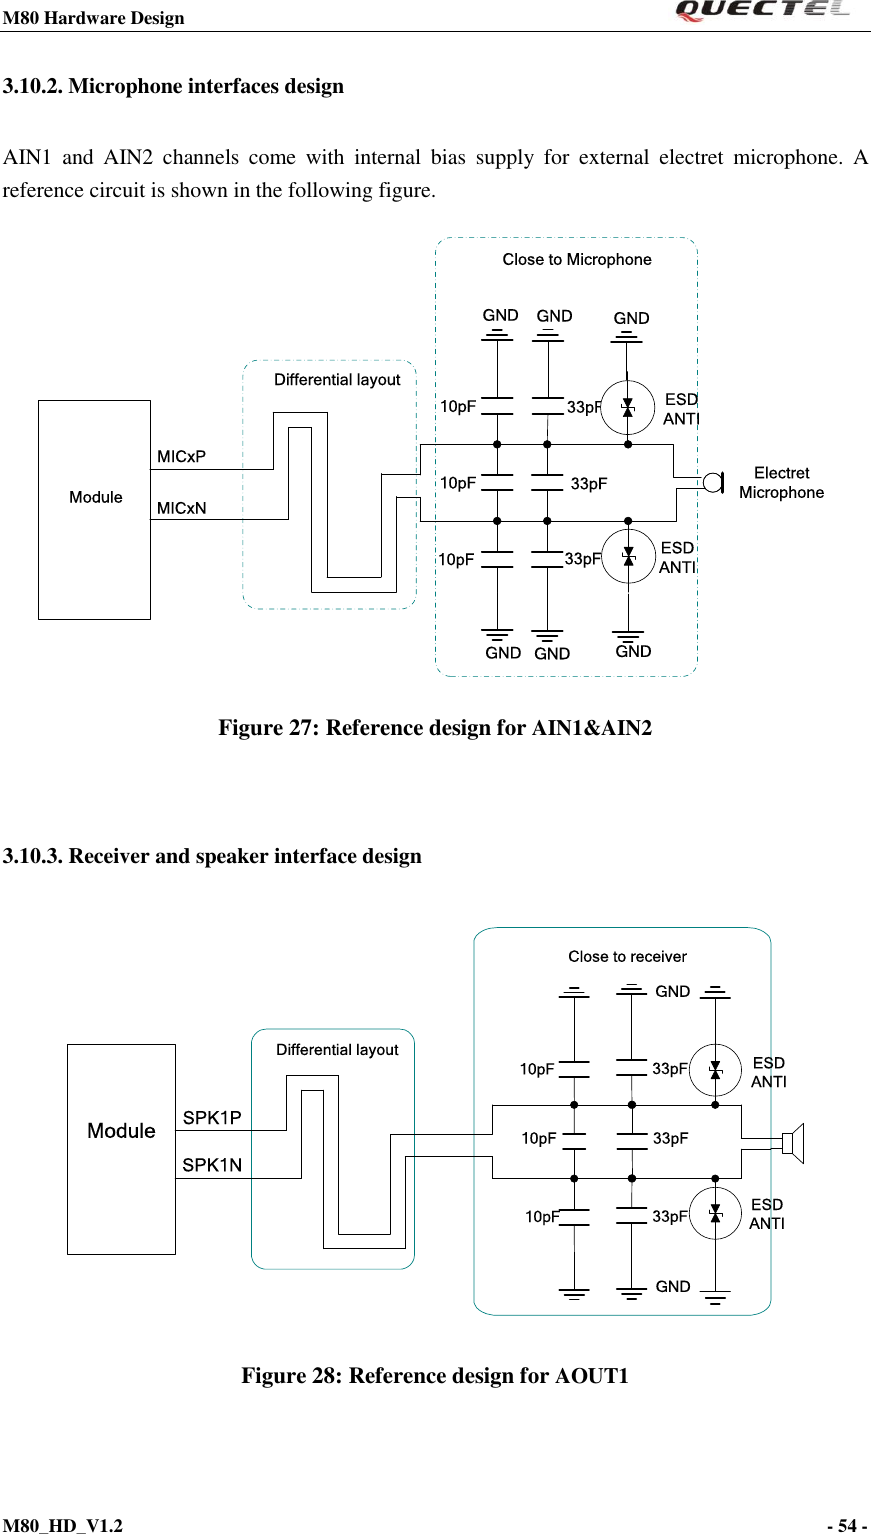 M80 Hardware Design                                                                M80_HD_V1.2                                                                                                                                        - 54 -    3.10.2. Microphone interfaces design AIN1  and  AIN2  channels  come  with  internal  bias  supply  for  external  electret  microphone.  A reference circuit is shown in the following figure.   10pF 33pF33pF33pFClose to MicrophoneMICxPMICxNGNDGNDDifferential layoutModuleElectret MicrophoneGNDGND10pF10pFGNDGNDESD ANTIESDANTI Figure 27: Reference design for AIN1&amp;AIN2  3.10.3. Receiver and speaker interface design SPK1PSPK1NDifferential layout10pF10pF33pF33pF33pFClose to receiverGNDGND10pFESD ANTIESD ANTIModule Figure 28: Reference design for AOUT1 